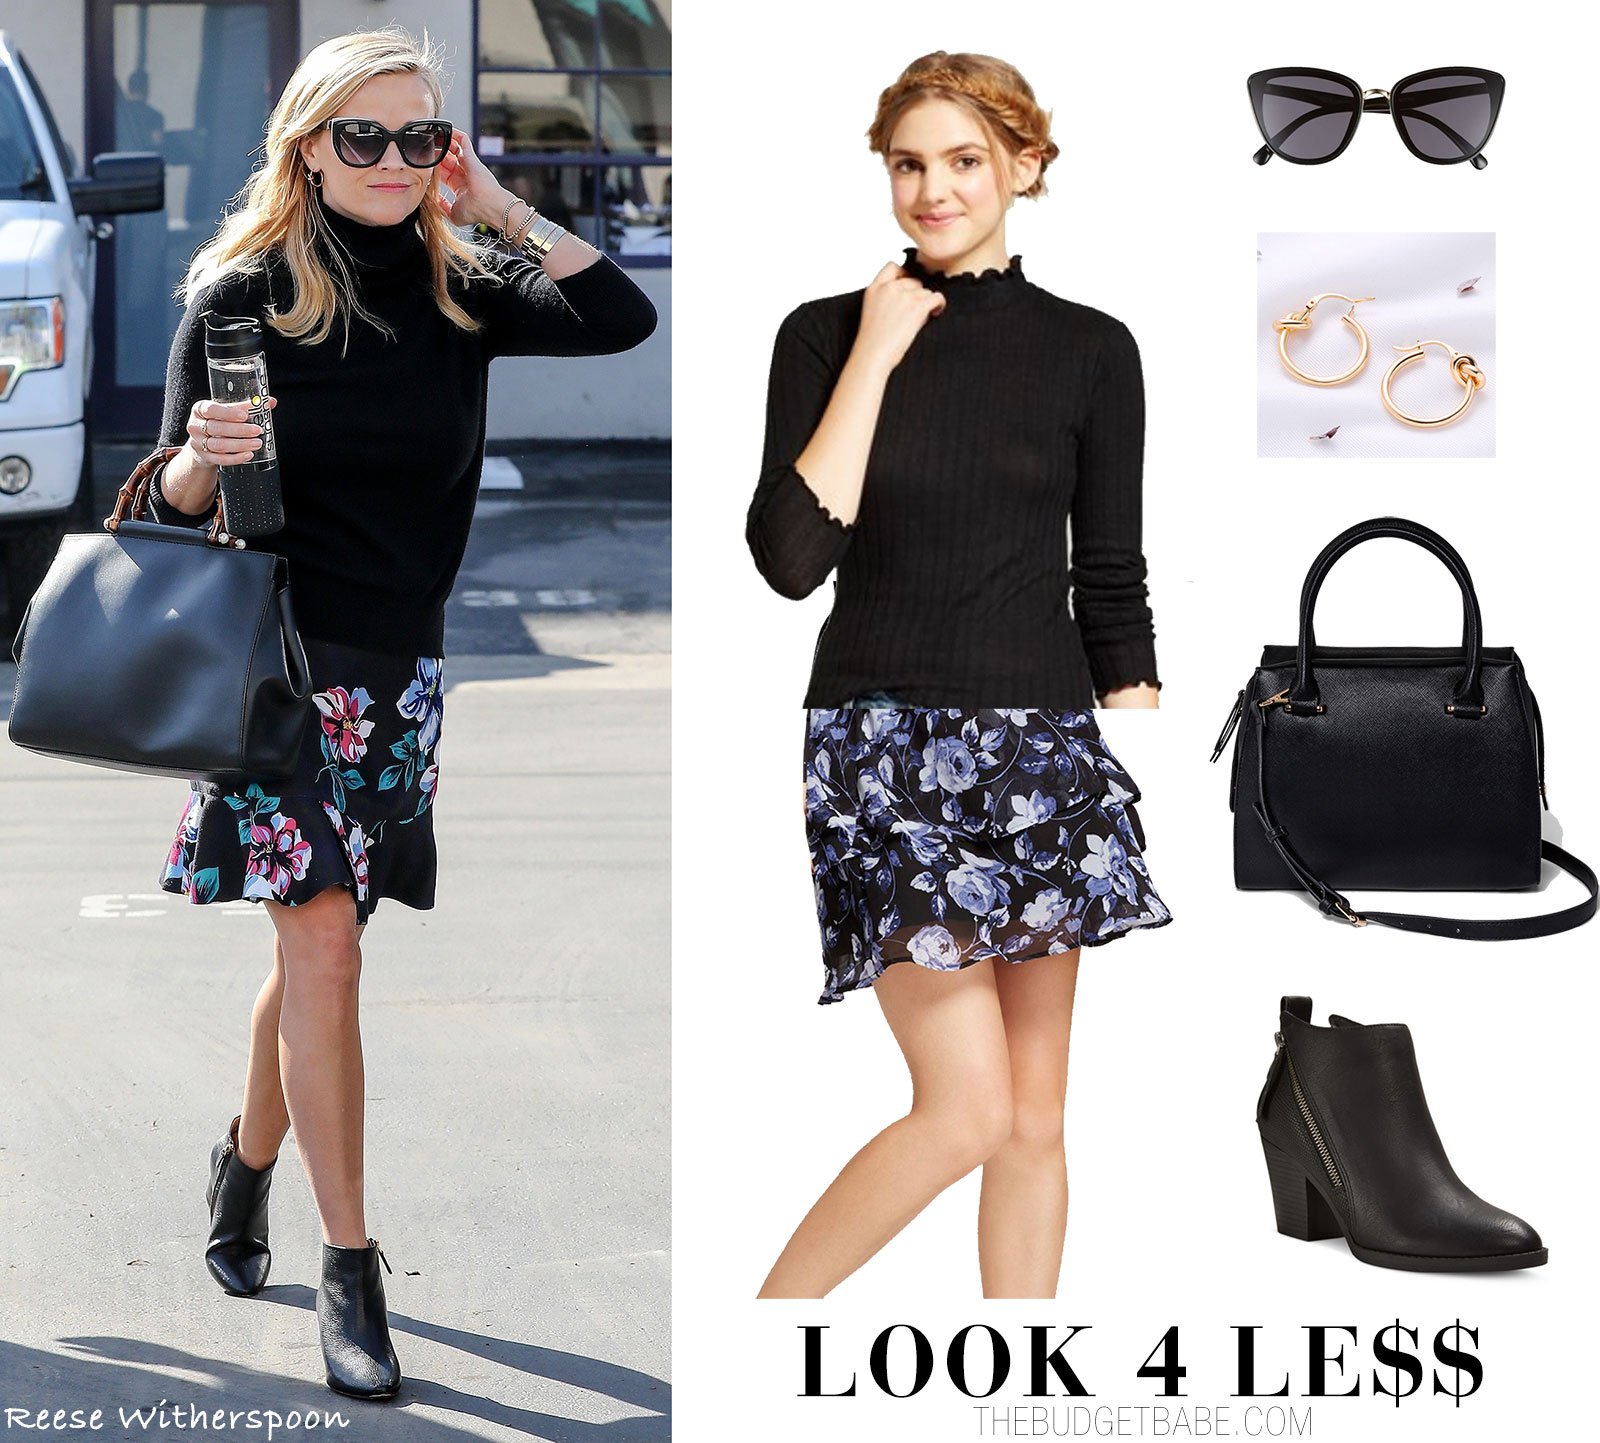 Reese Witherspoon Look for Less Fashion Style in Draper James Floral Skirt and Black Turtleneck Sweater